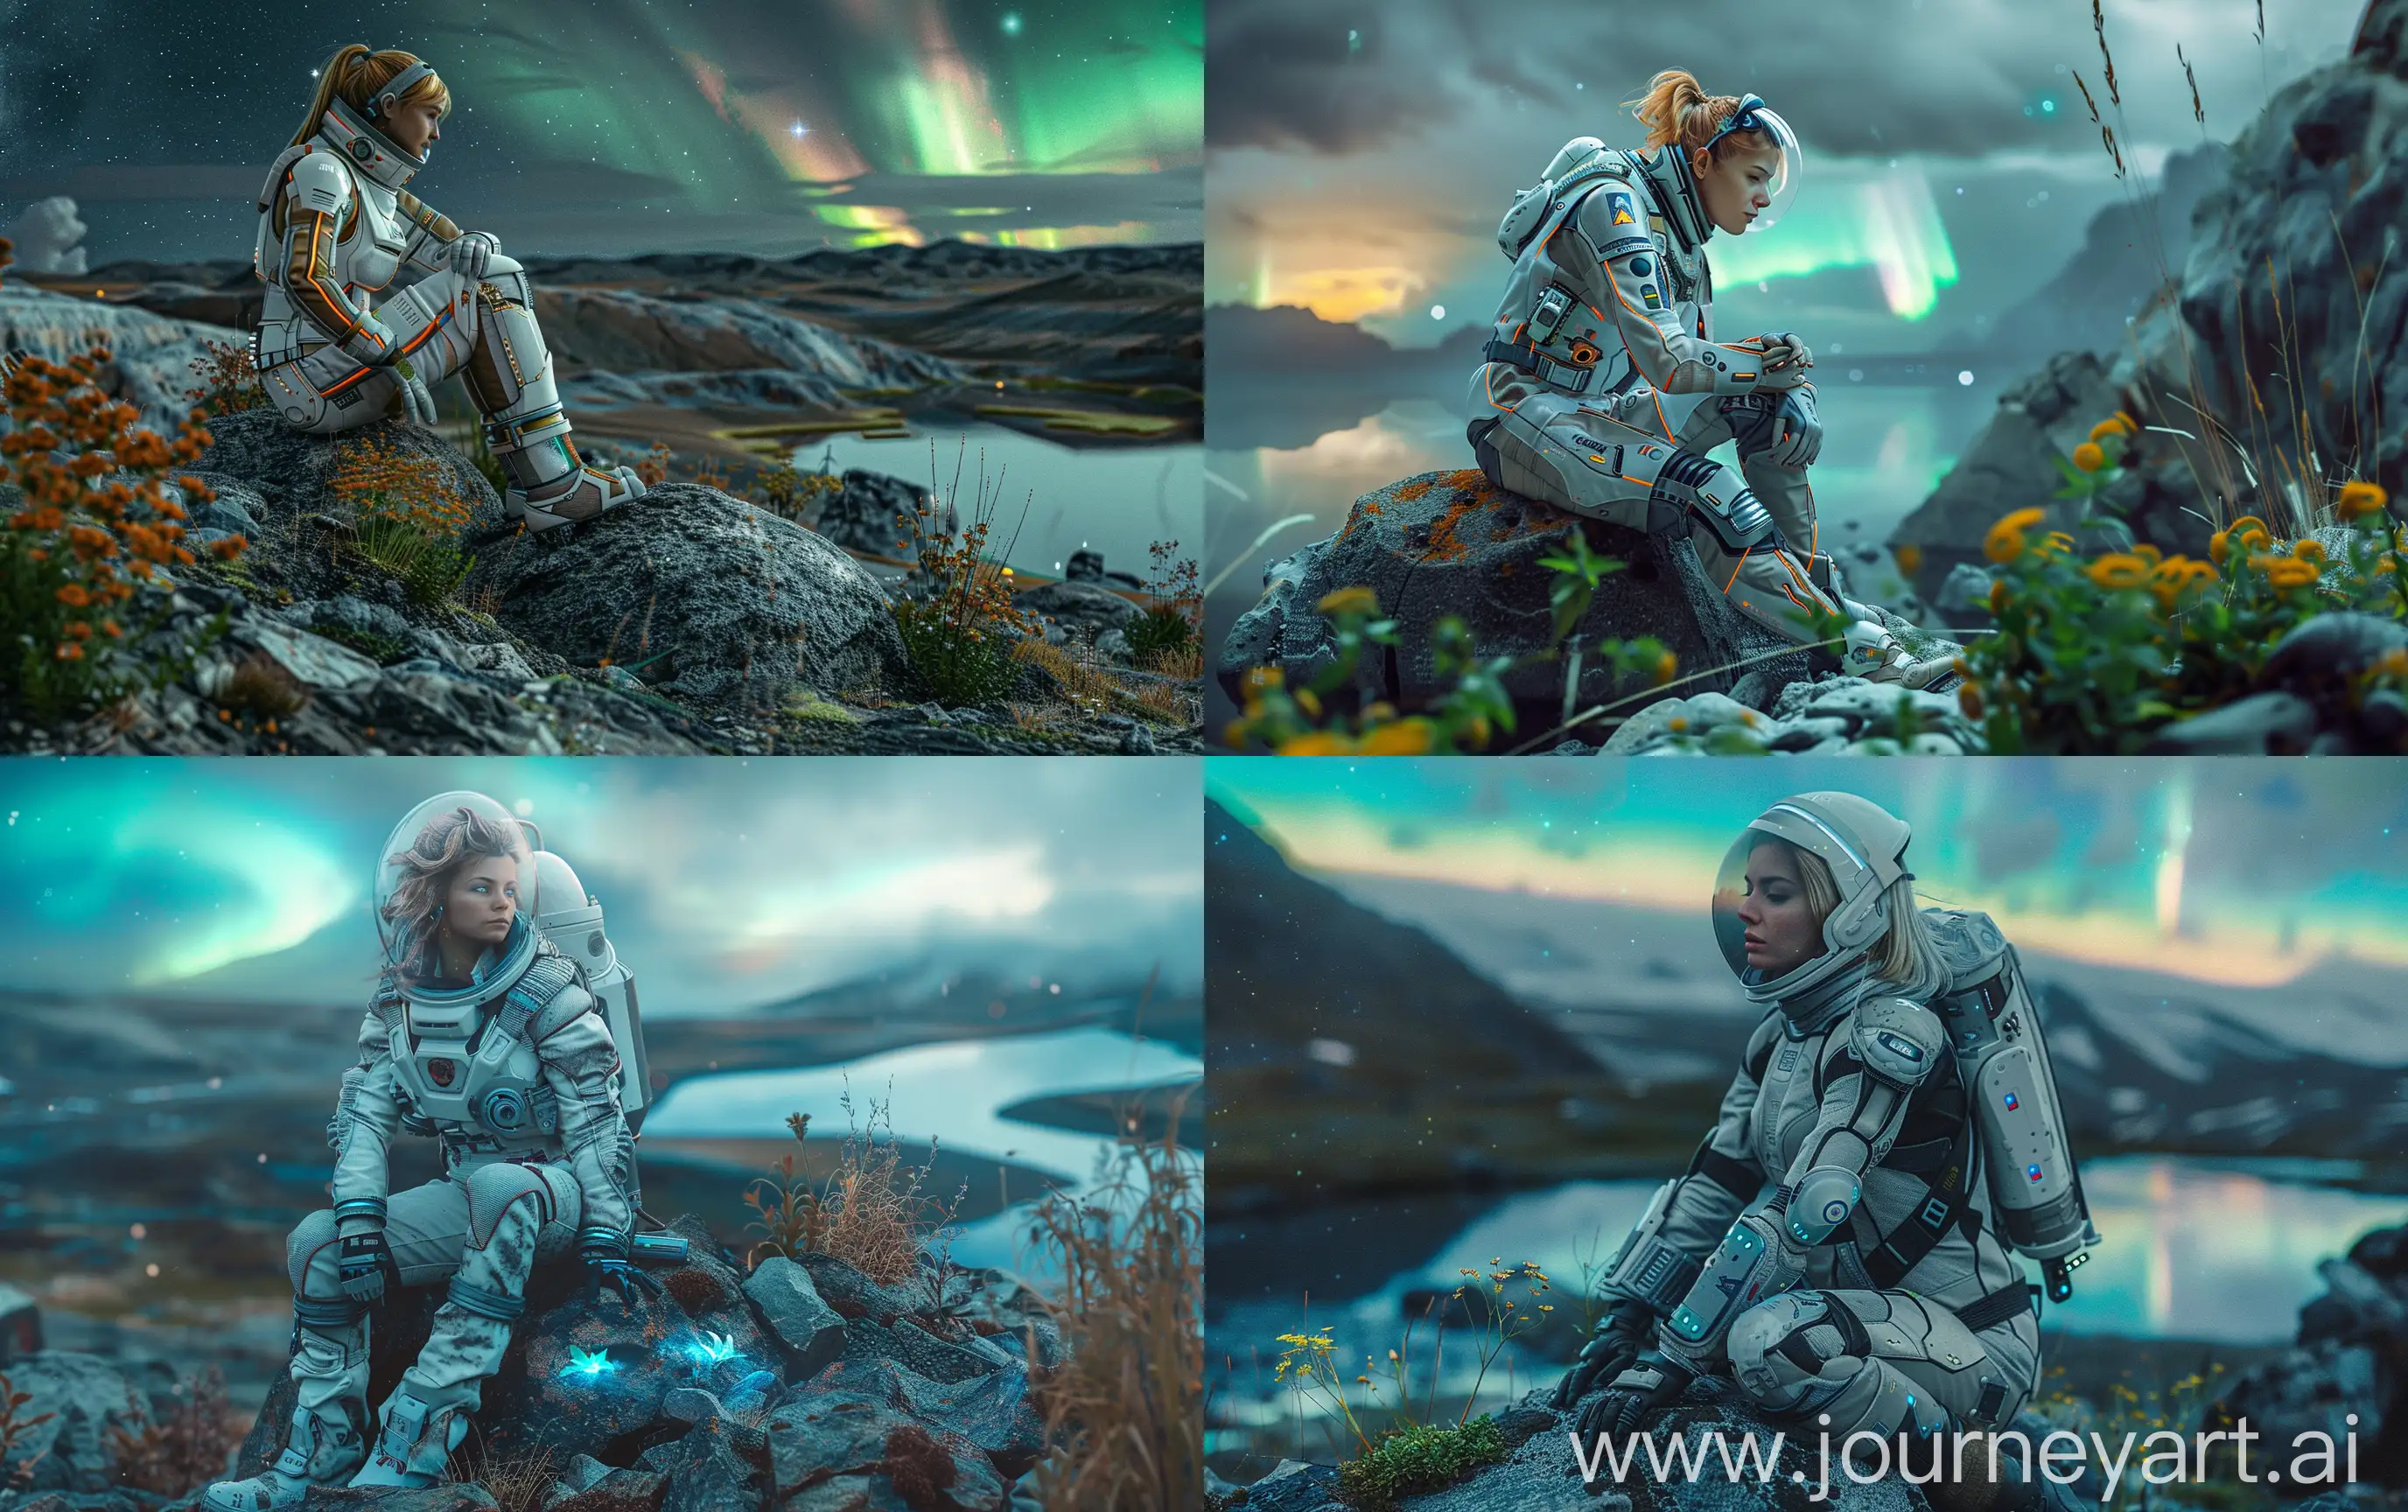 a fair hair attractive woman in a spacesuit stays on a rock, she exploring an alternative planet with fiction plants, friendly fiction life forms around, sci-fi nature, small lake, northern lights anomalies at the distance, super realistic, cinematic --ar 16:10